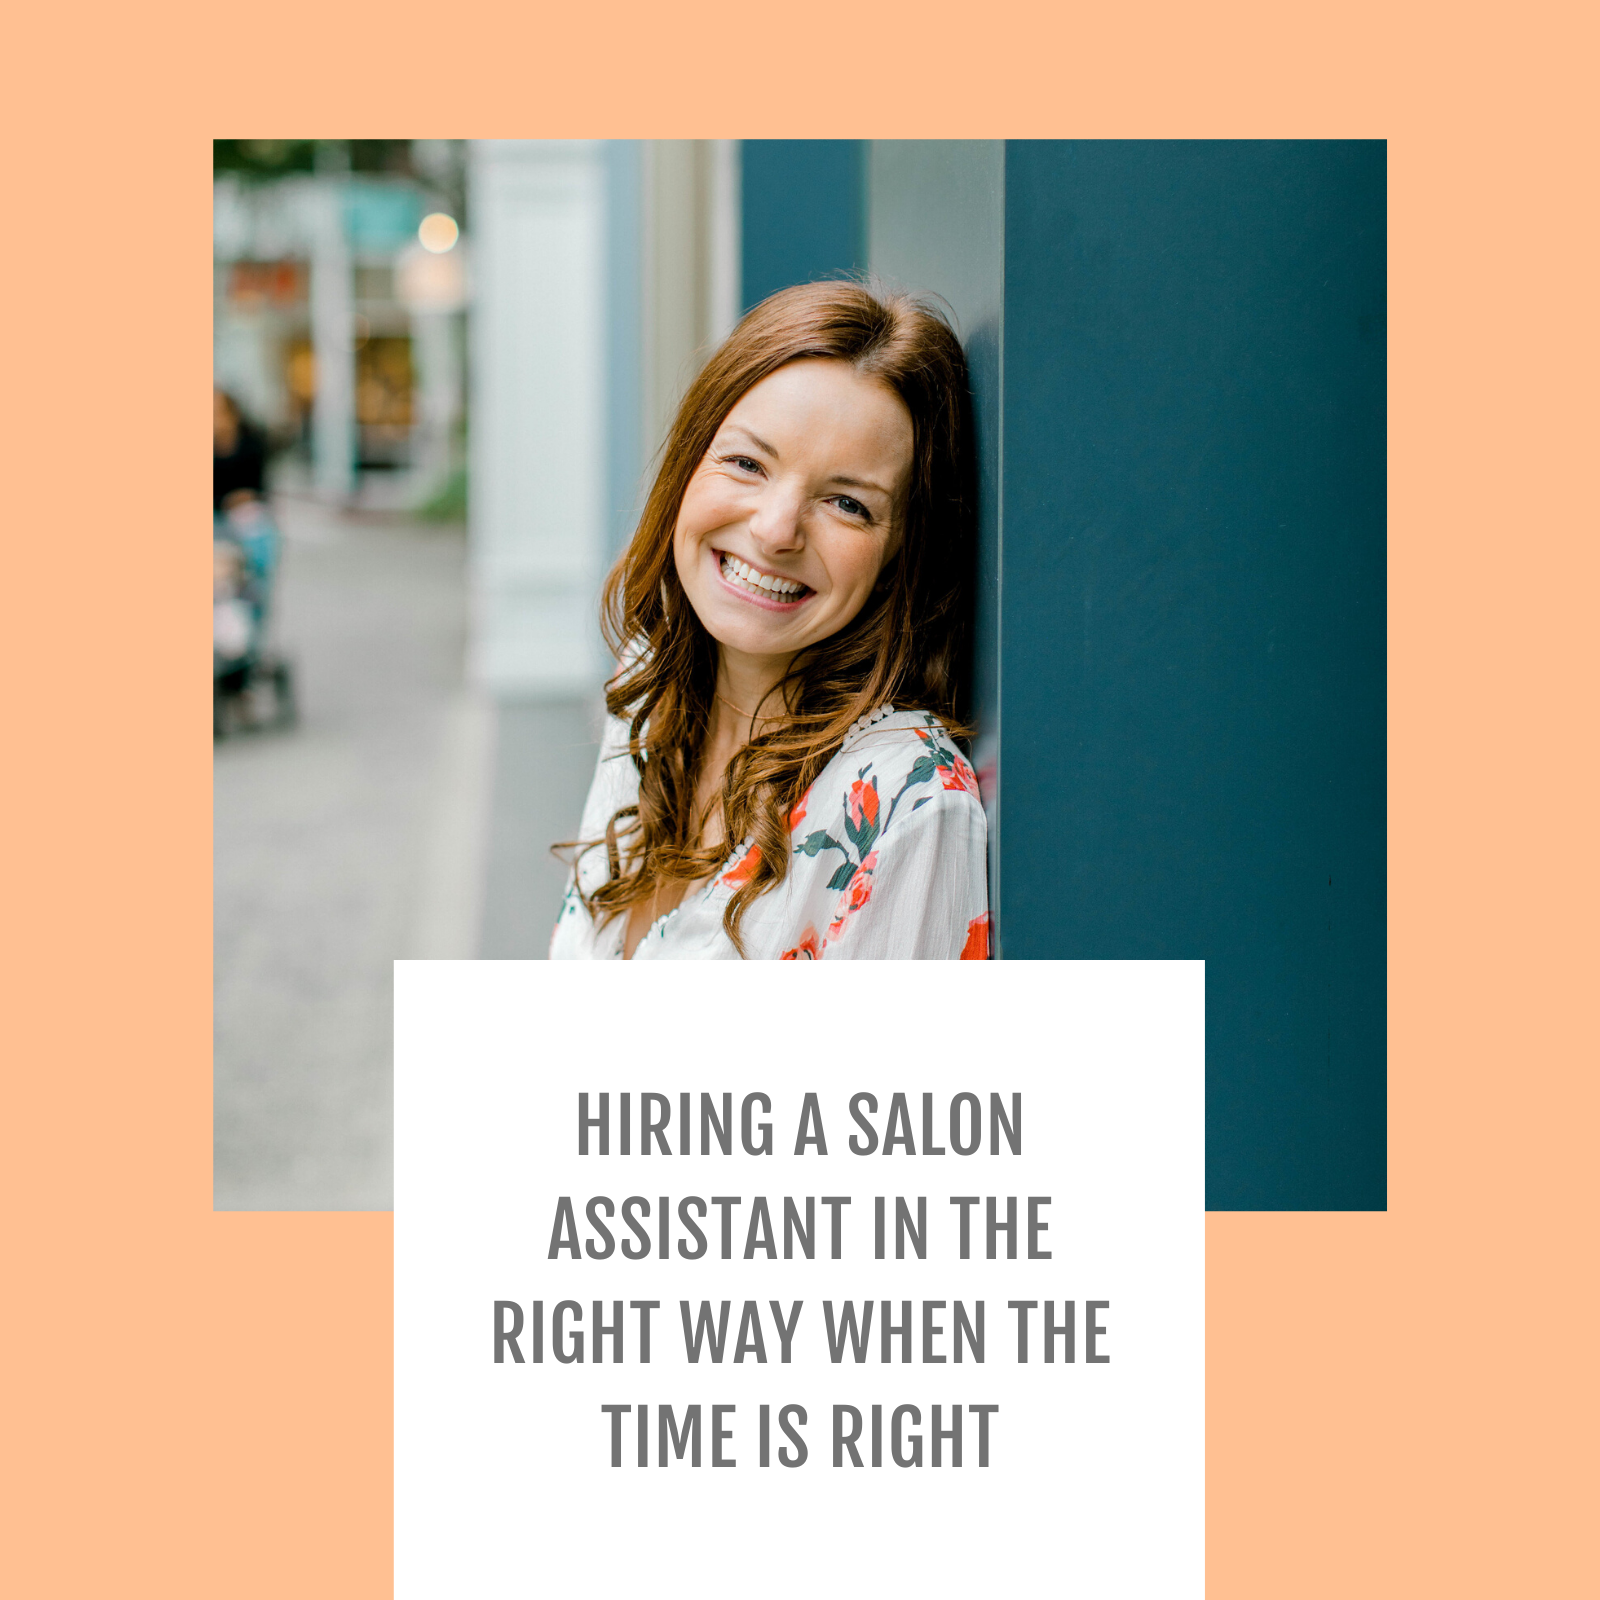 Episode #013: Hiring a salon assistant in the right way when the time is right